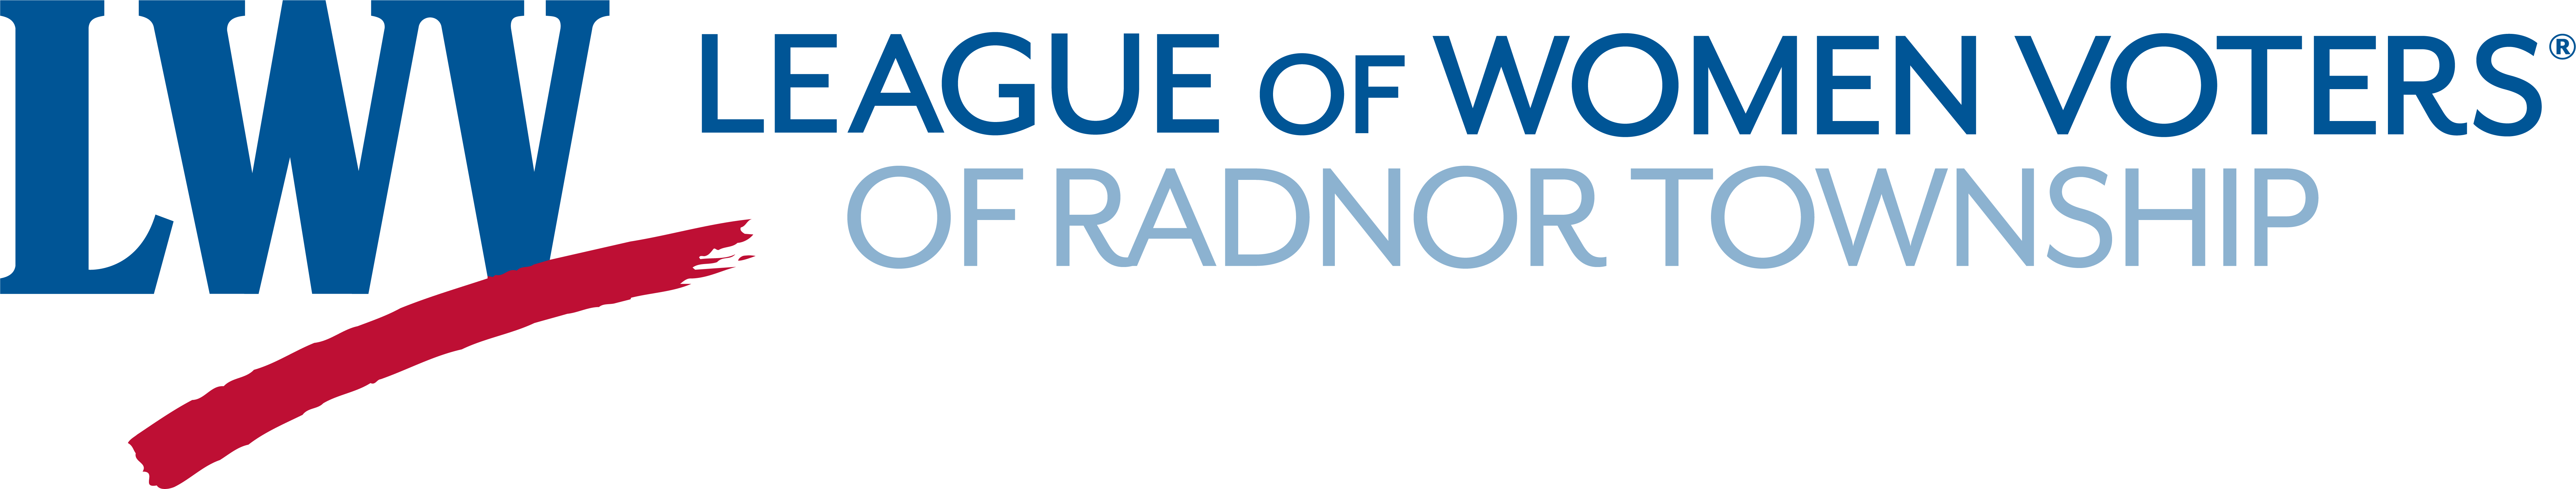 League of Women Voters of Radnor Township logo